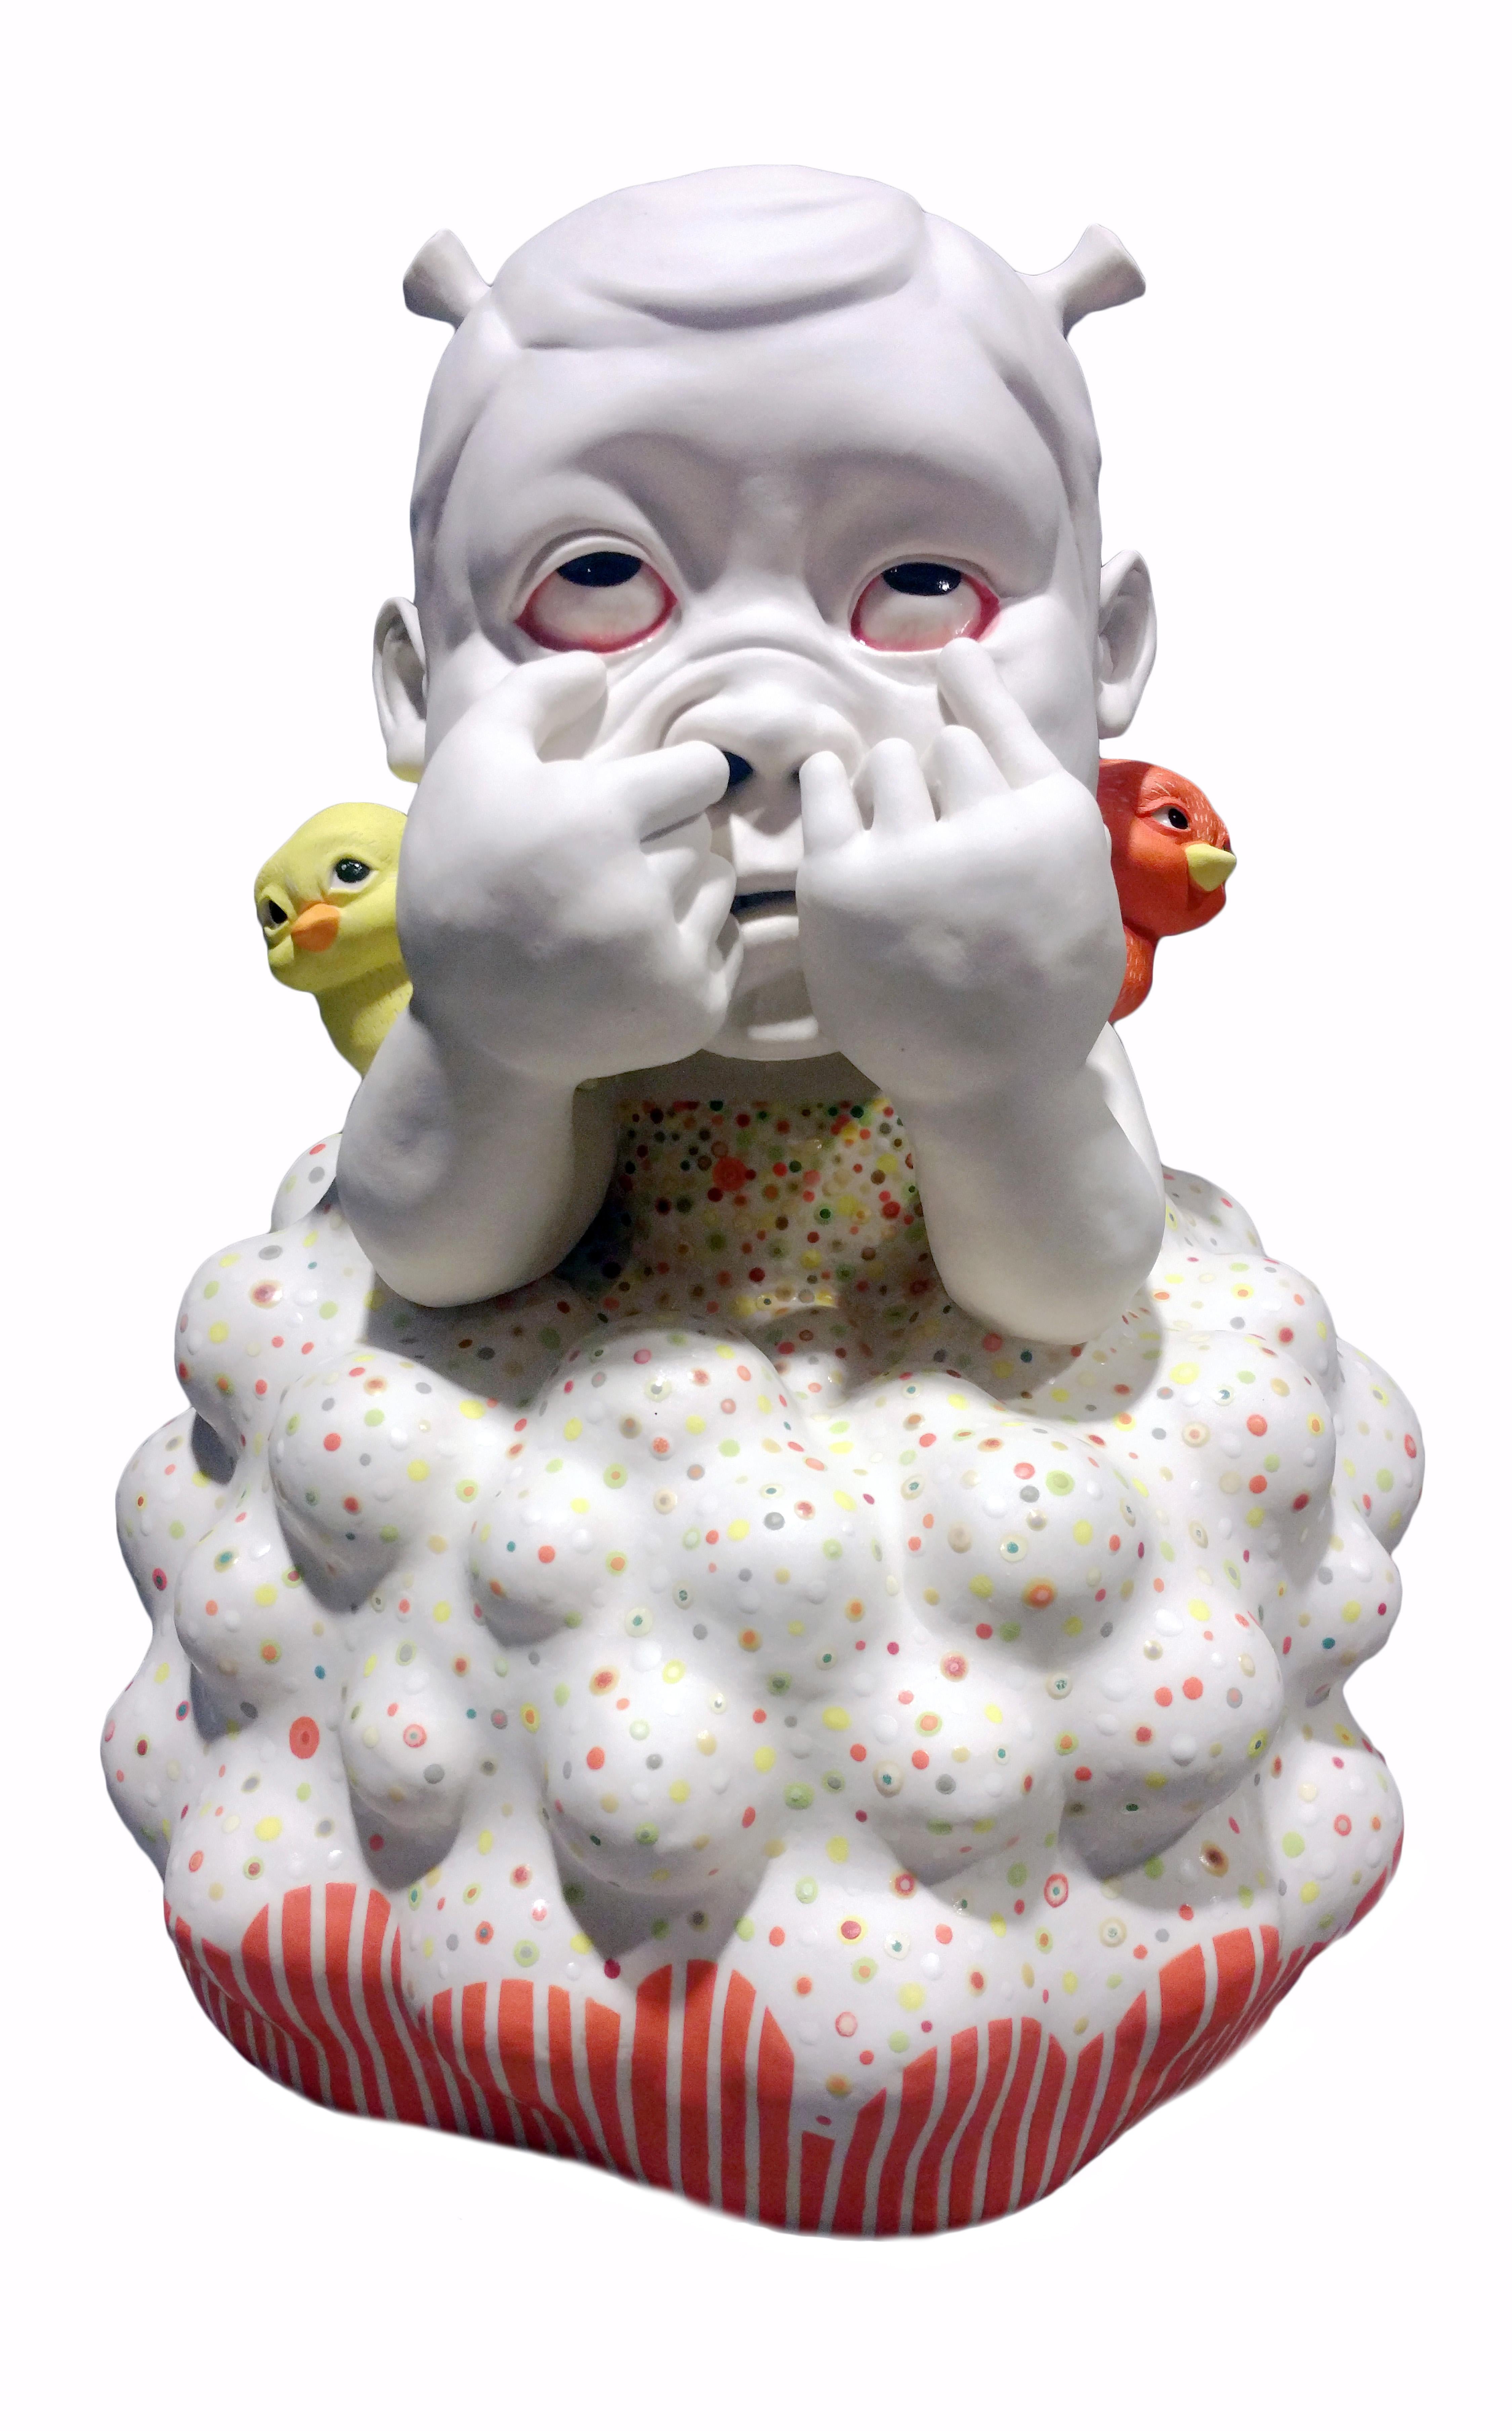 Kyungmin Park is a figurative ceramic sculptor drawing inspiration from childlike perspectives. Contrasting the darker emotions and restricted psyche of adulthood with the boundless consciousness of children, Kyungmin’s sculptures confront the view